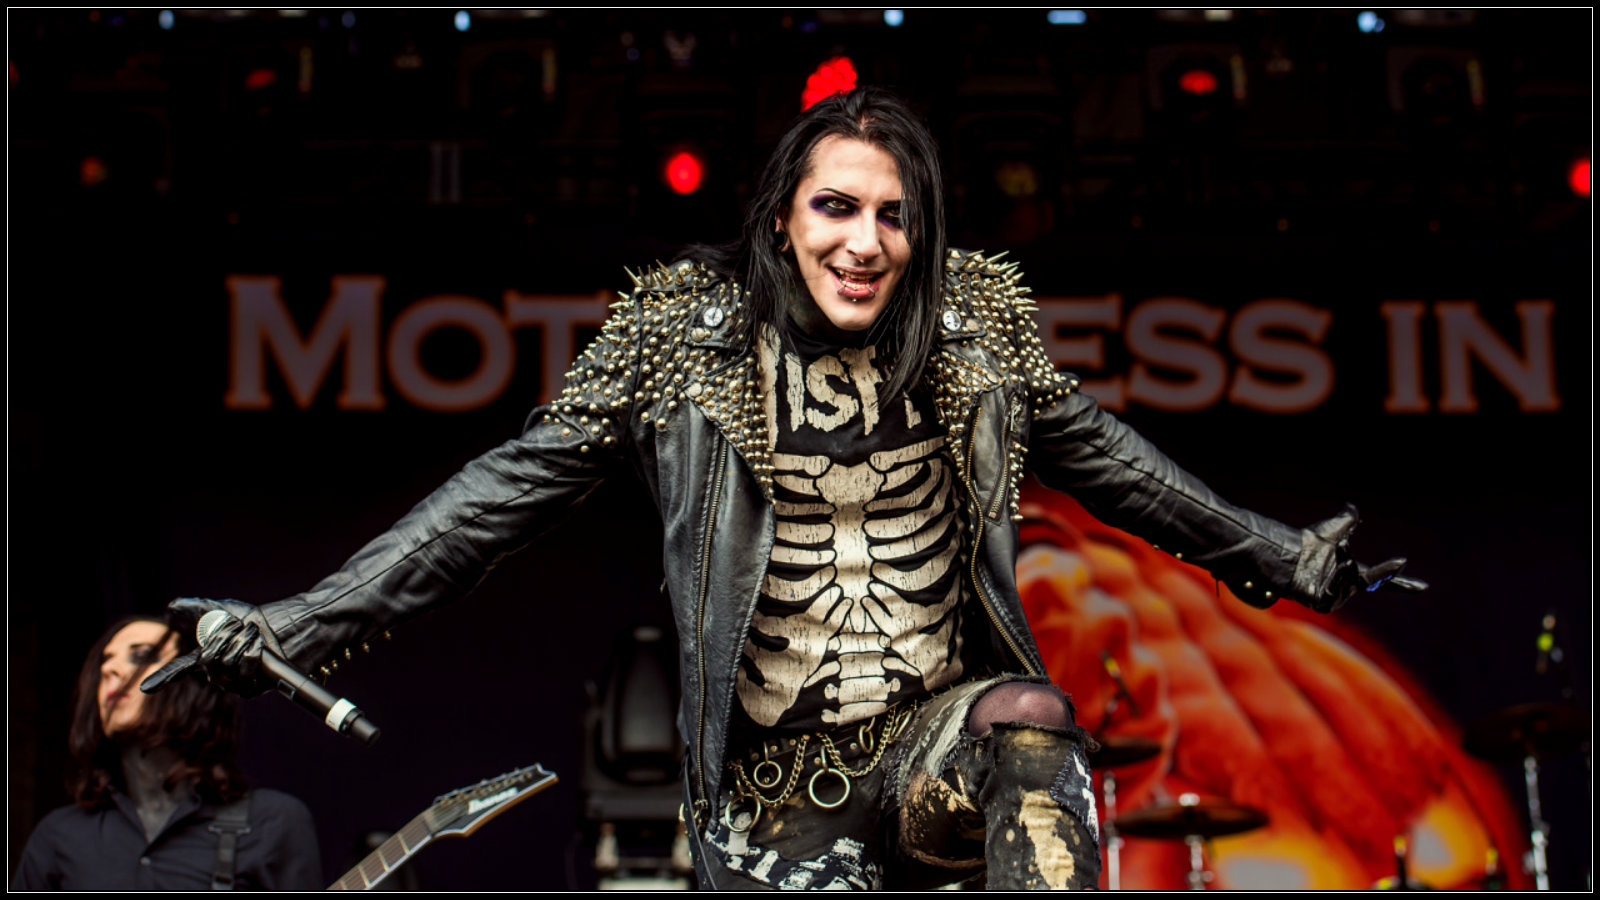 275 Chris Motionless Cerulli Stock Photos HighRes Pictures and Images   Getty Images